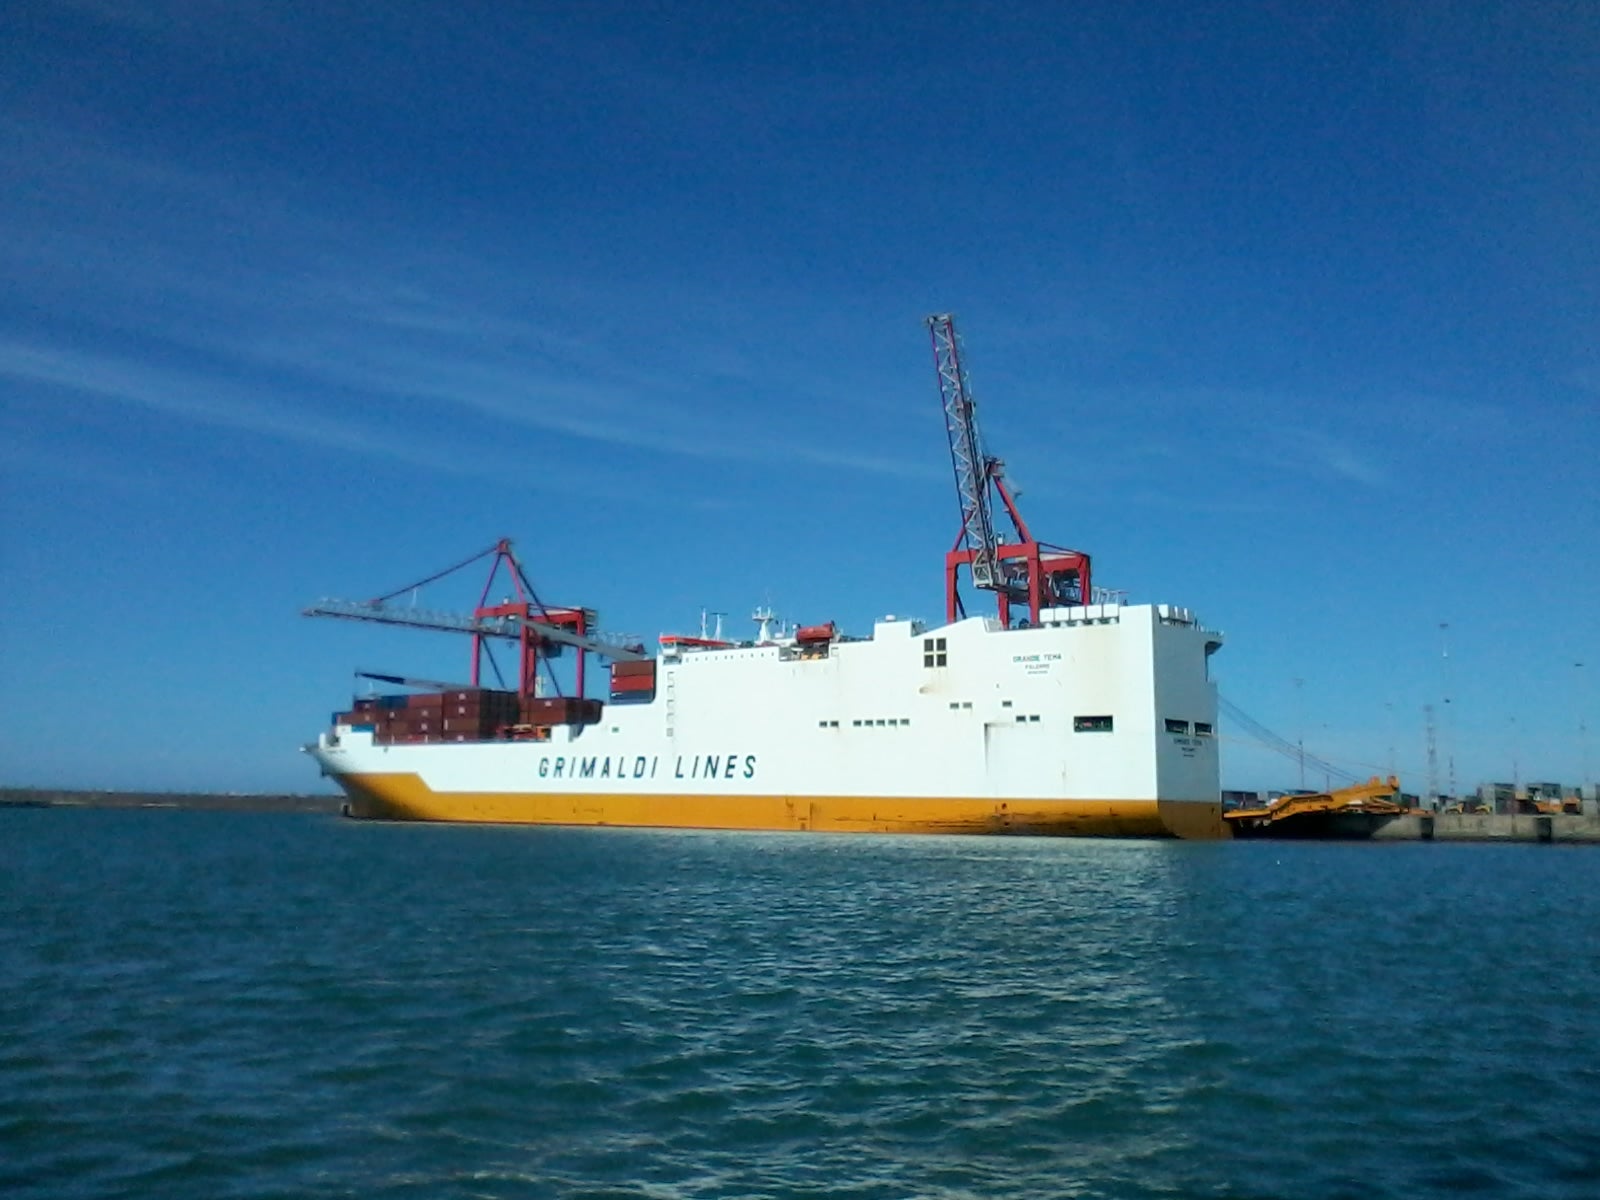 The Grande Tema, a 71,000-tonne ship is operated by Grimaldi Lines.